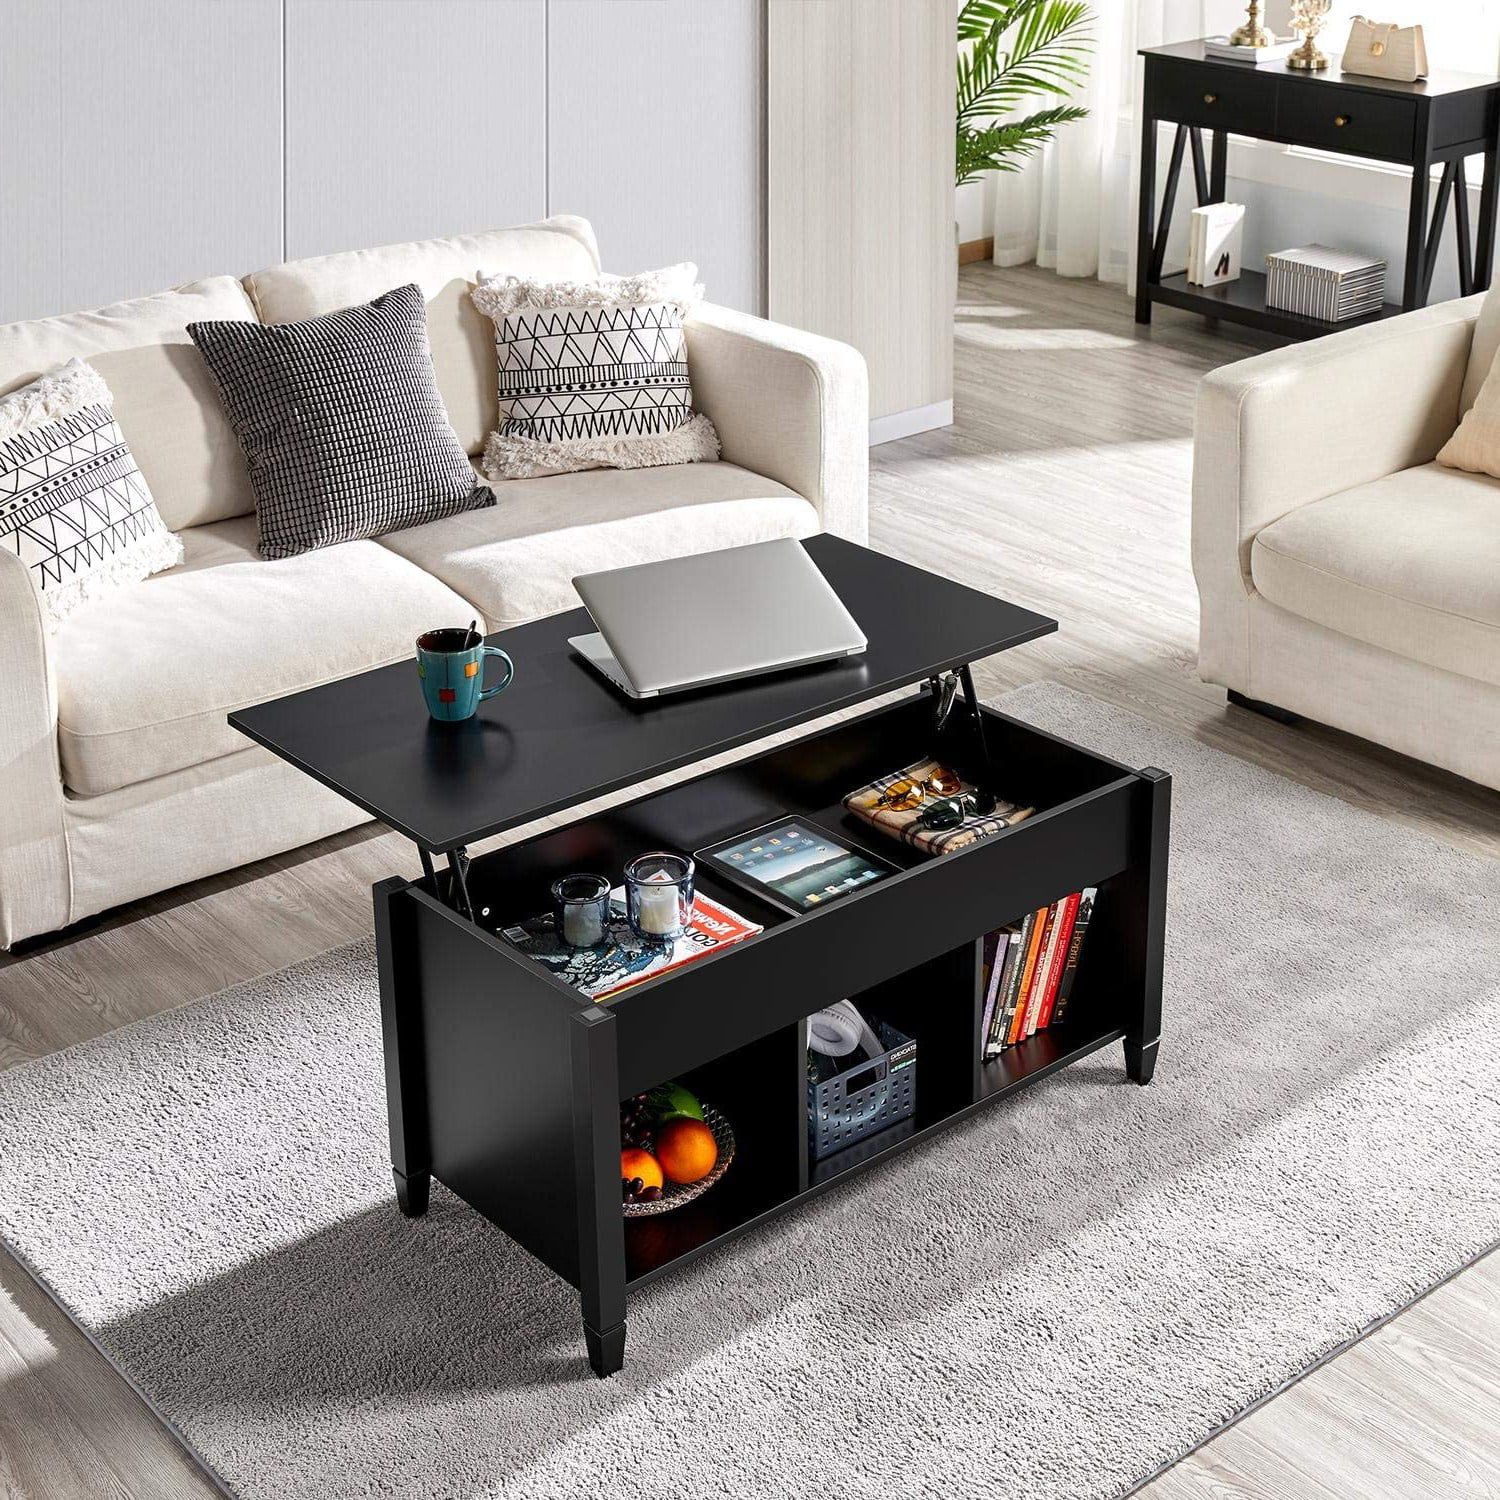 Zimtown Lift Top Coffee Table With Hidden Compartment Wooden Modern  Multifunctional Coffee Table Furniture, Black – Walmart Inside Coffee Tables With Compartment (View 13 of 20)